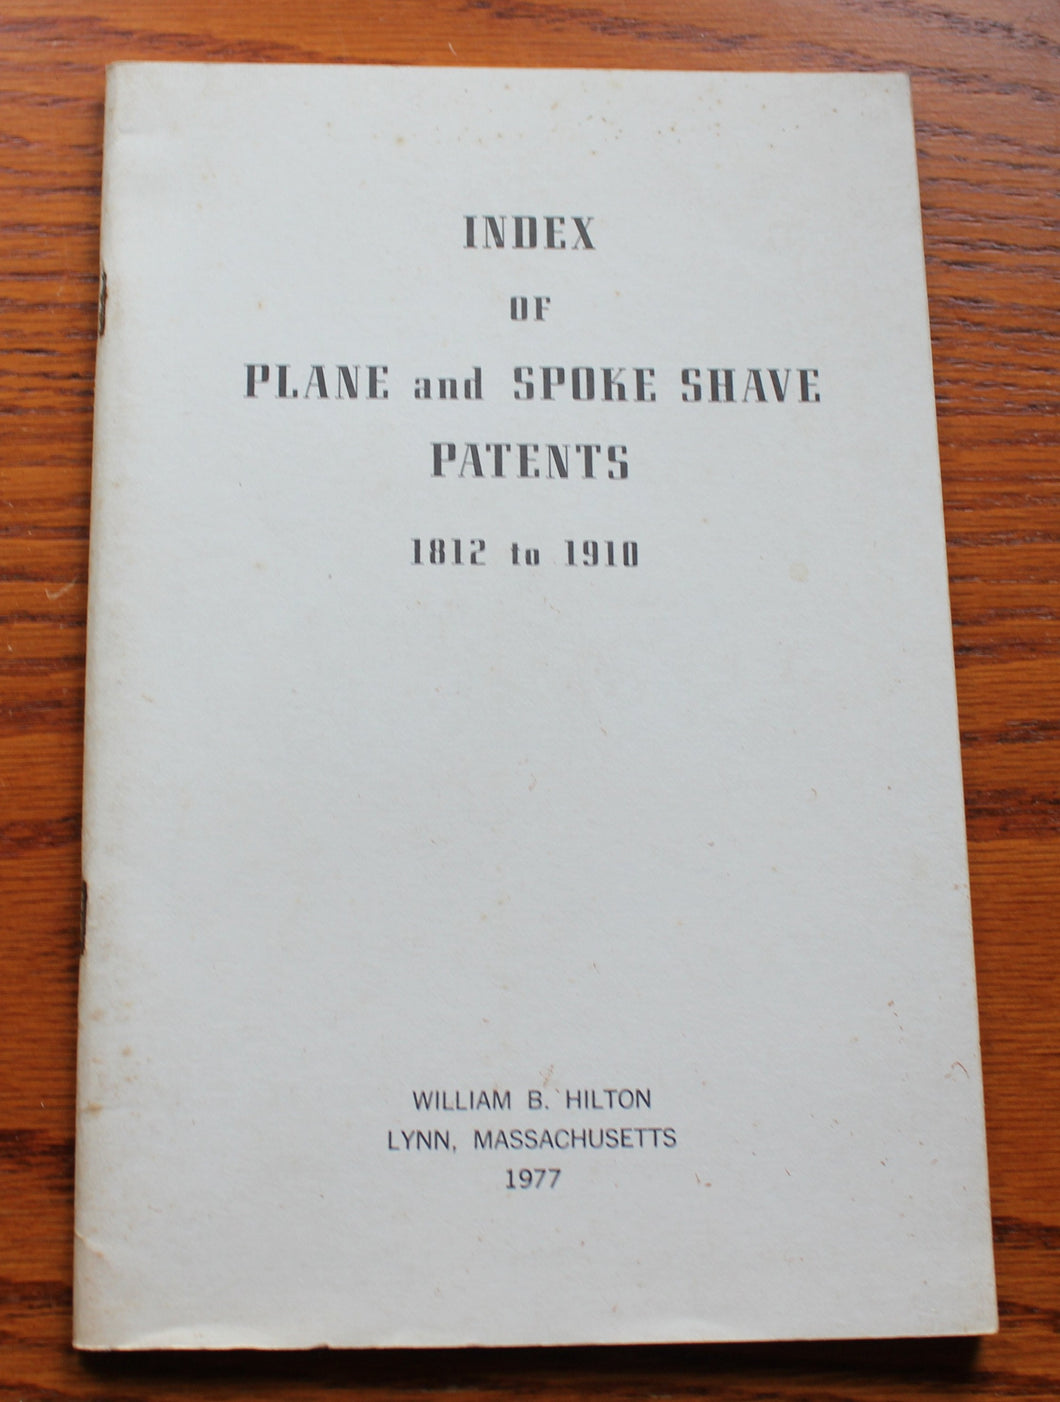 Index of PLANE and SPOKE SHAVE PATENTS 1812 1910 William B. Hilton